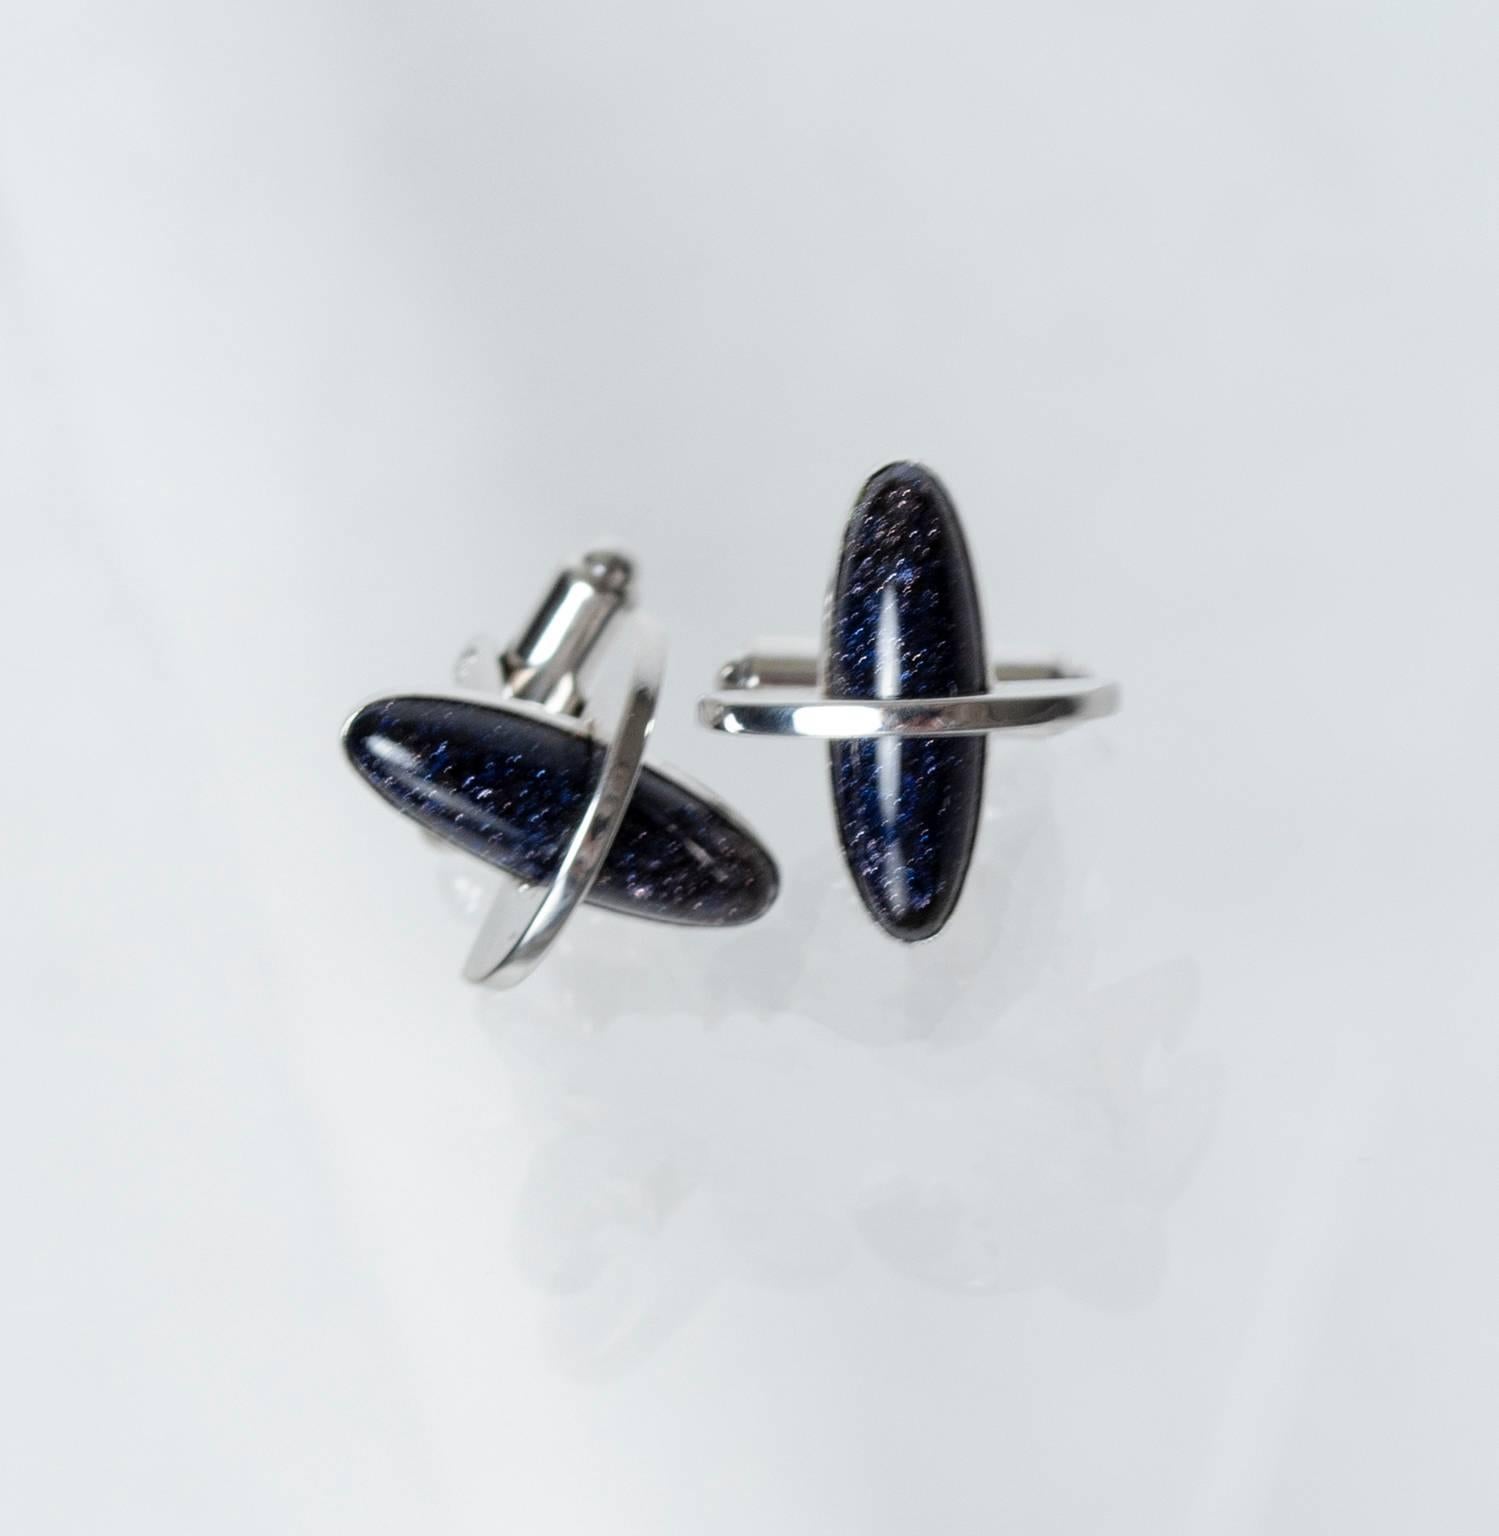 The perfect accompaniment to your slim-lapel suits and skinny ties, these iconic cuff links are the sartorial equivalent of a 2-martini lunch. Neither blue nor black but a combination of both, their most compelling feature is their subtle sparkle: